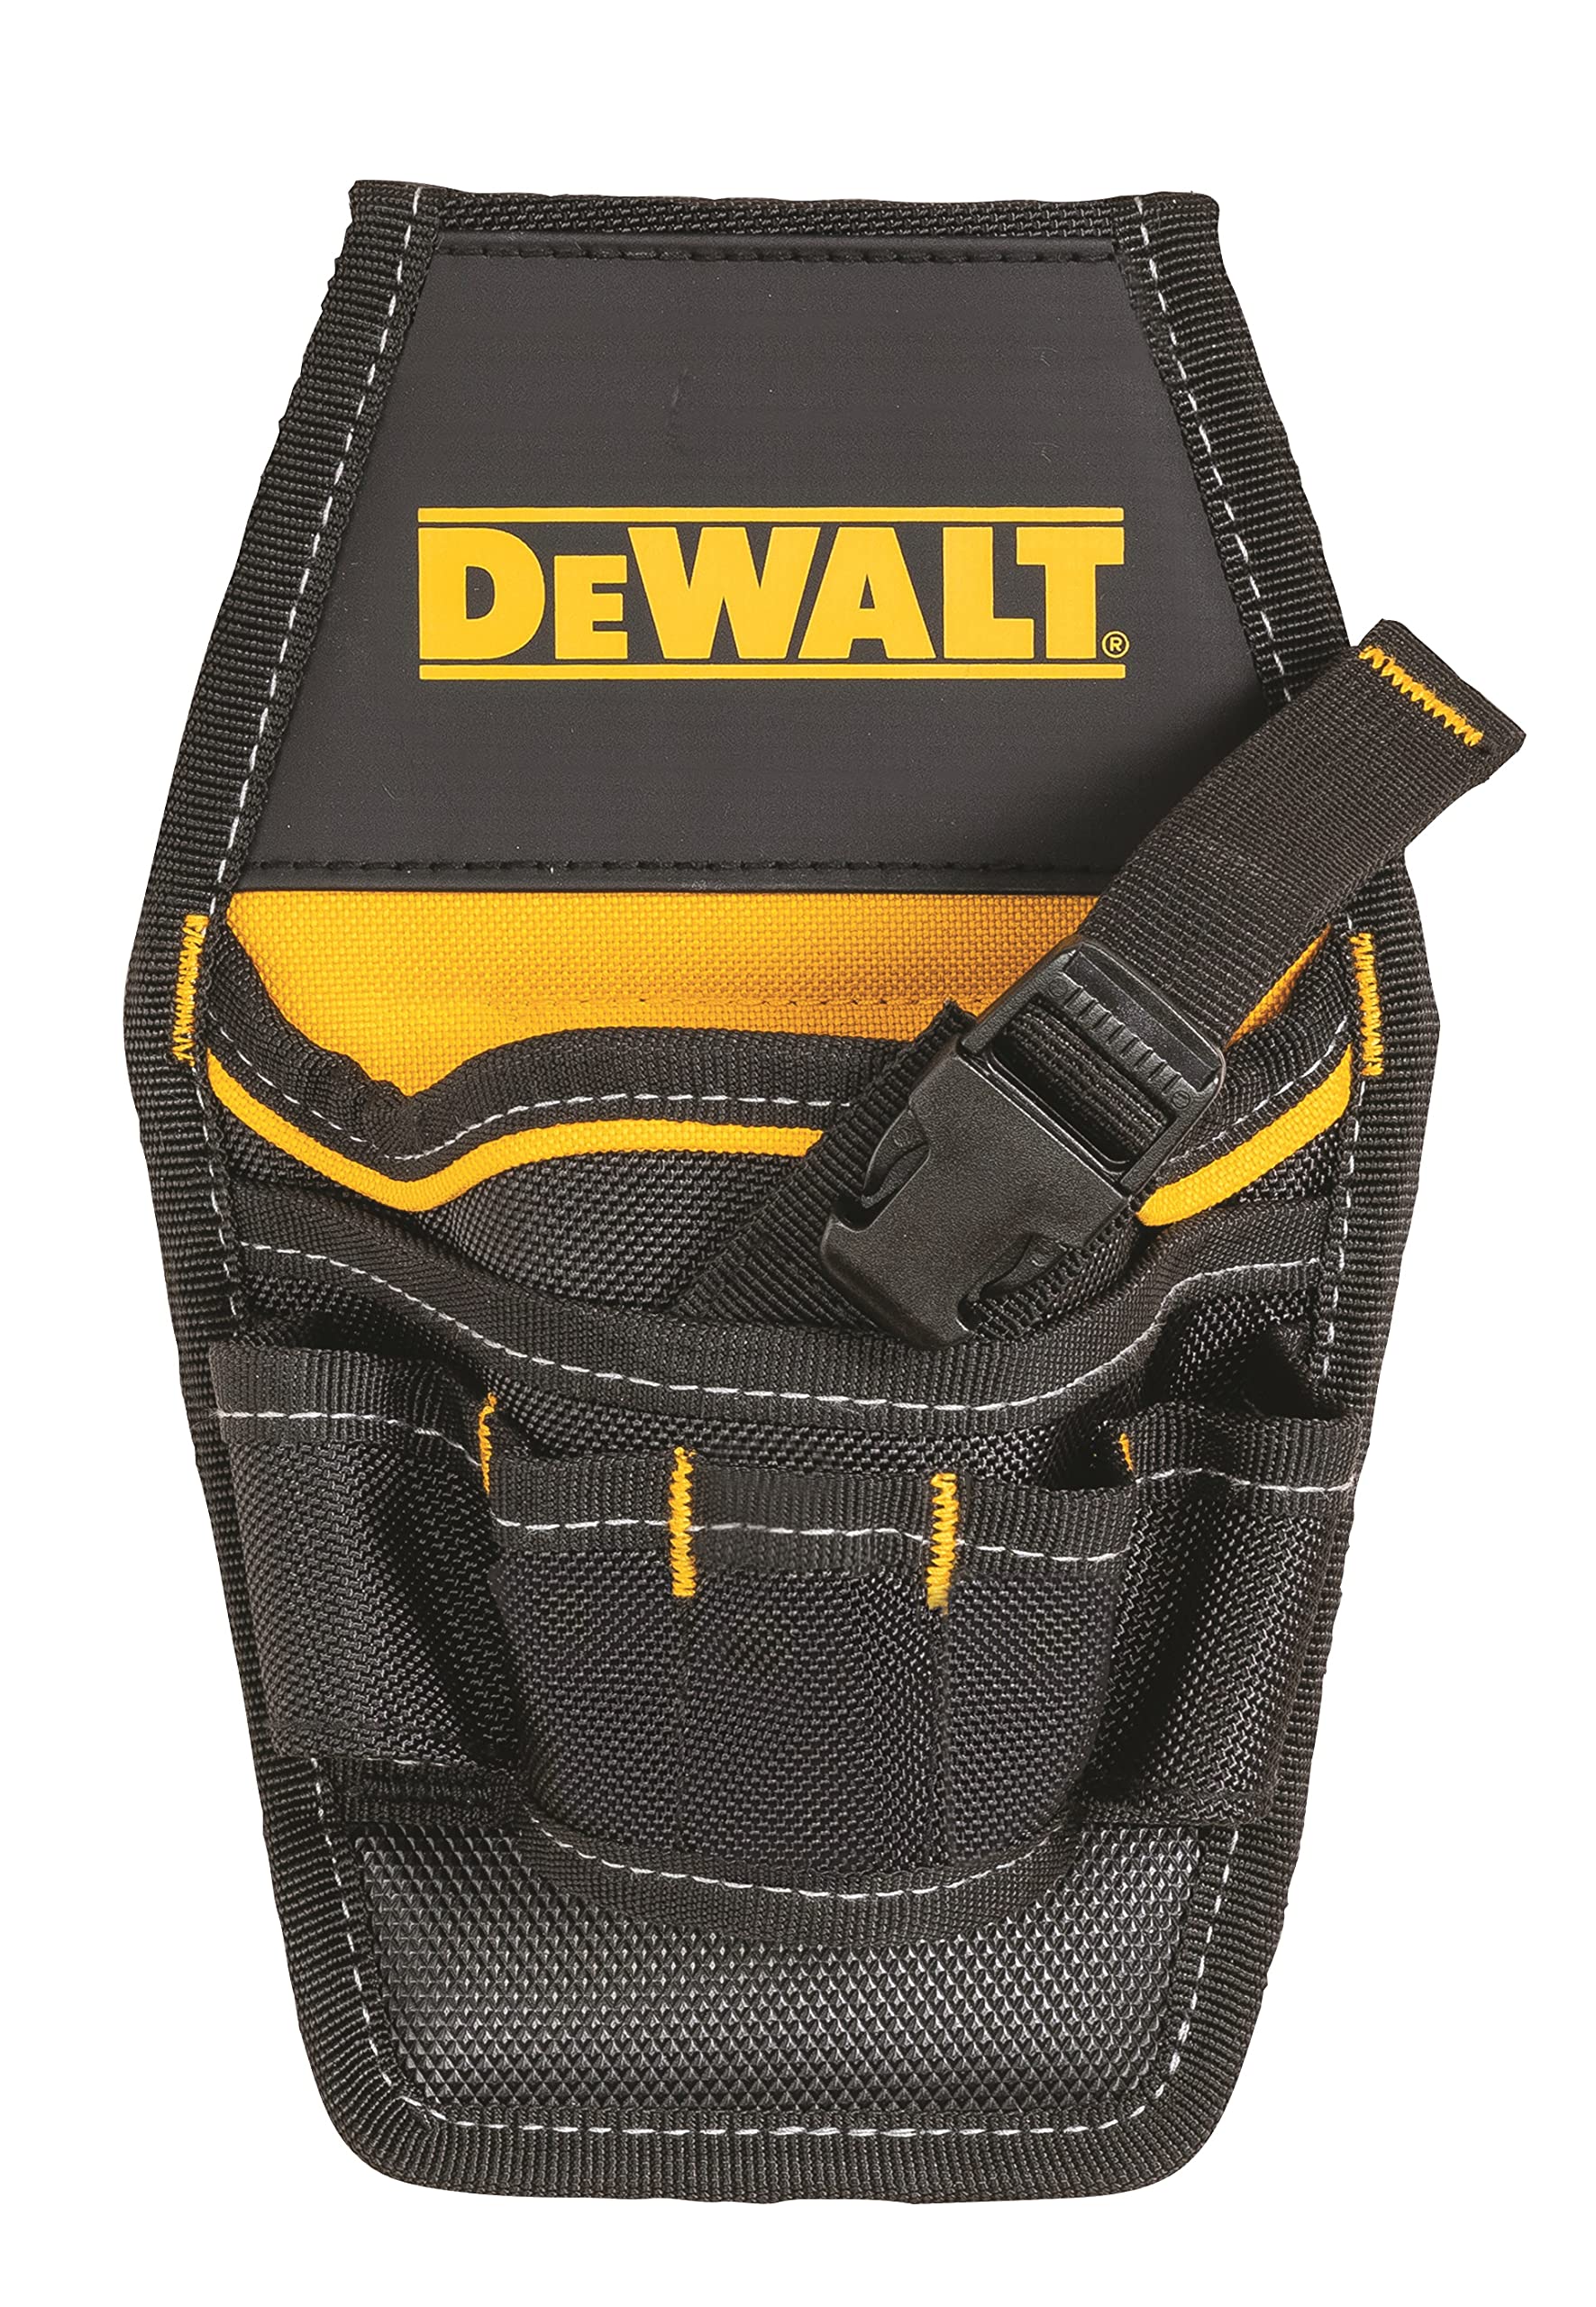 DEWALT Heavy-Duty Impact Driver Holster $10 + Free Shipping w/ Prime or on orders $35+